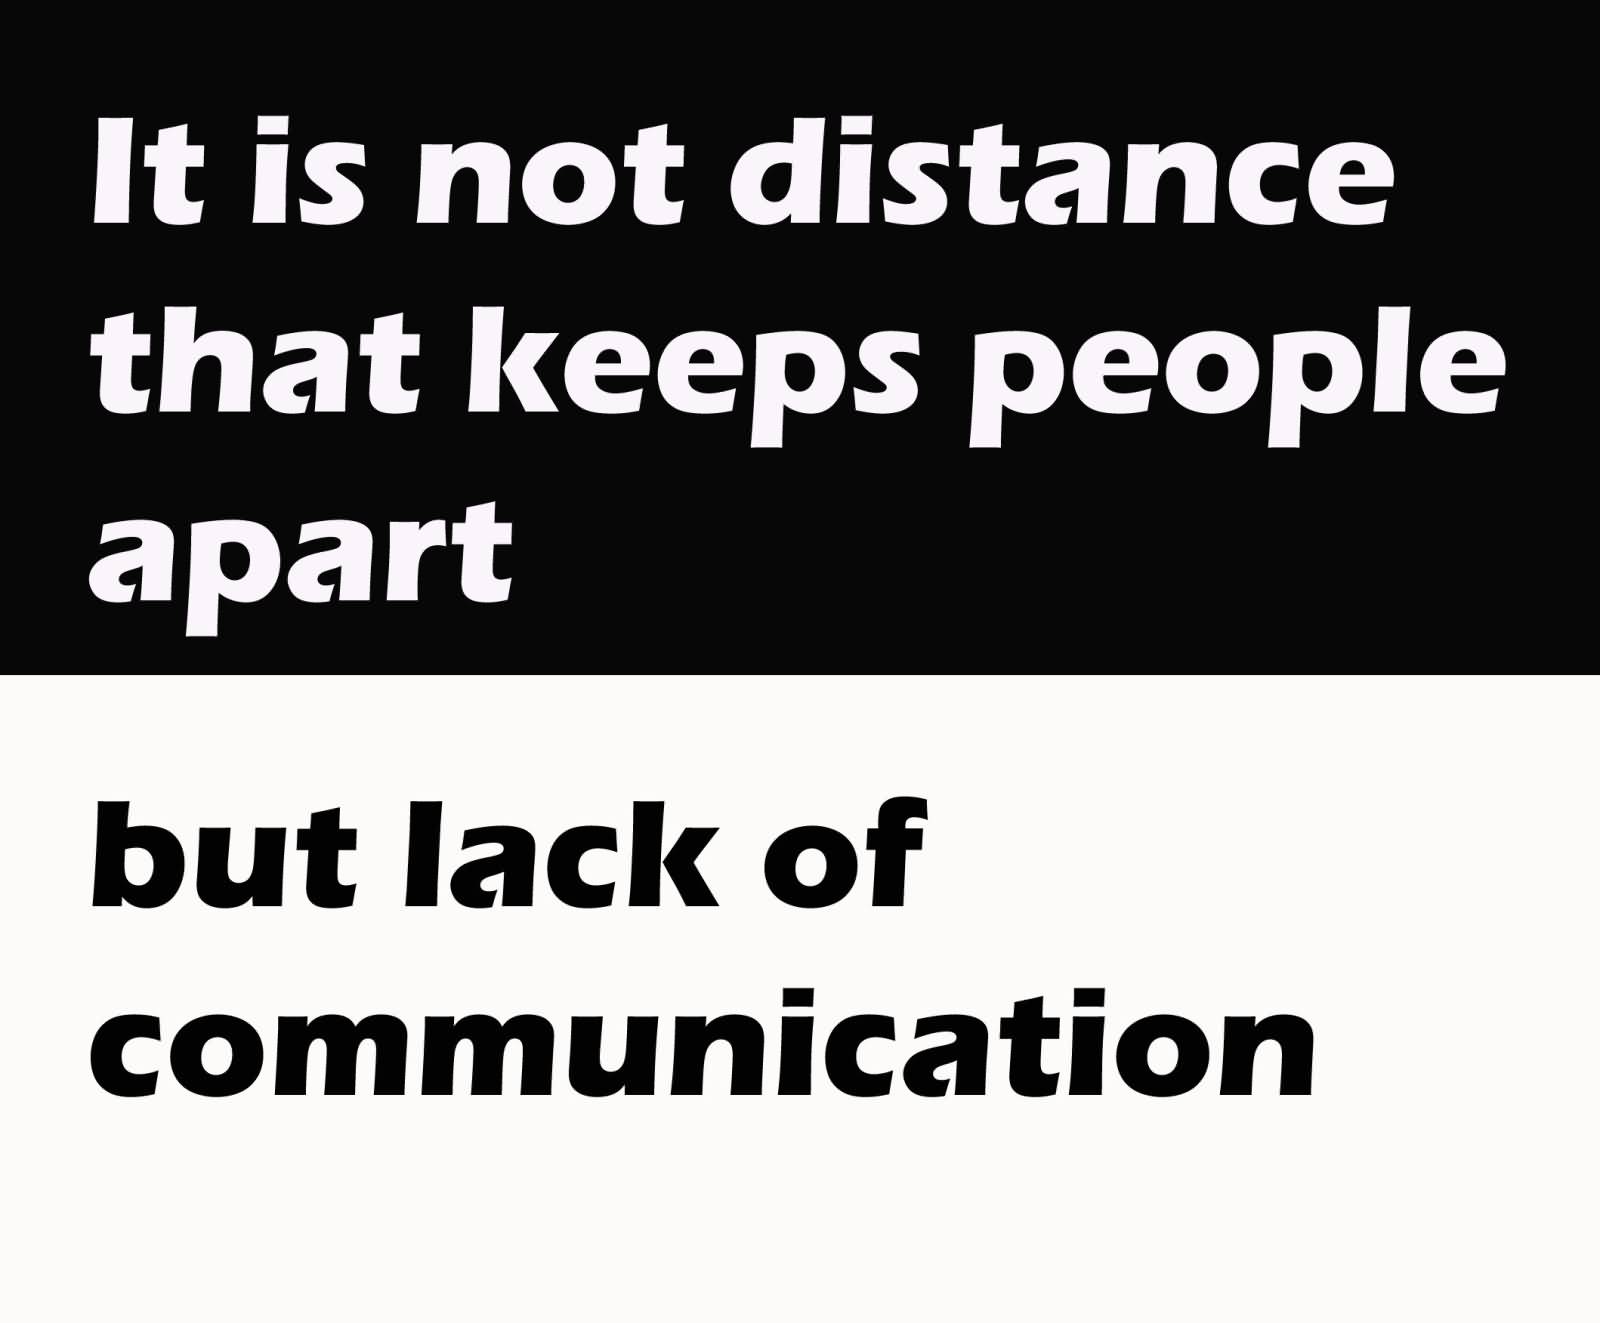 It is not the distance that keeps the people apart but lack of communication